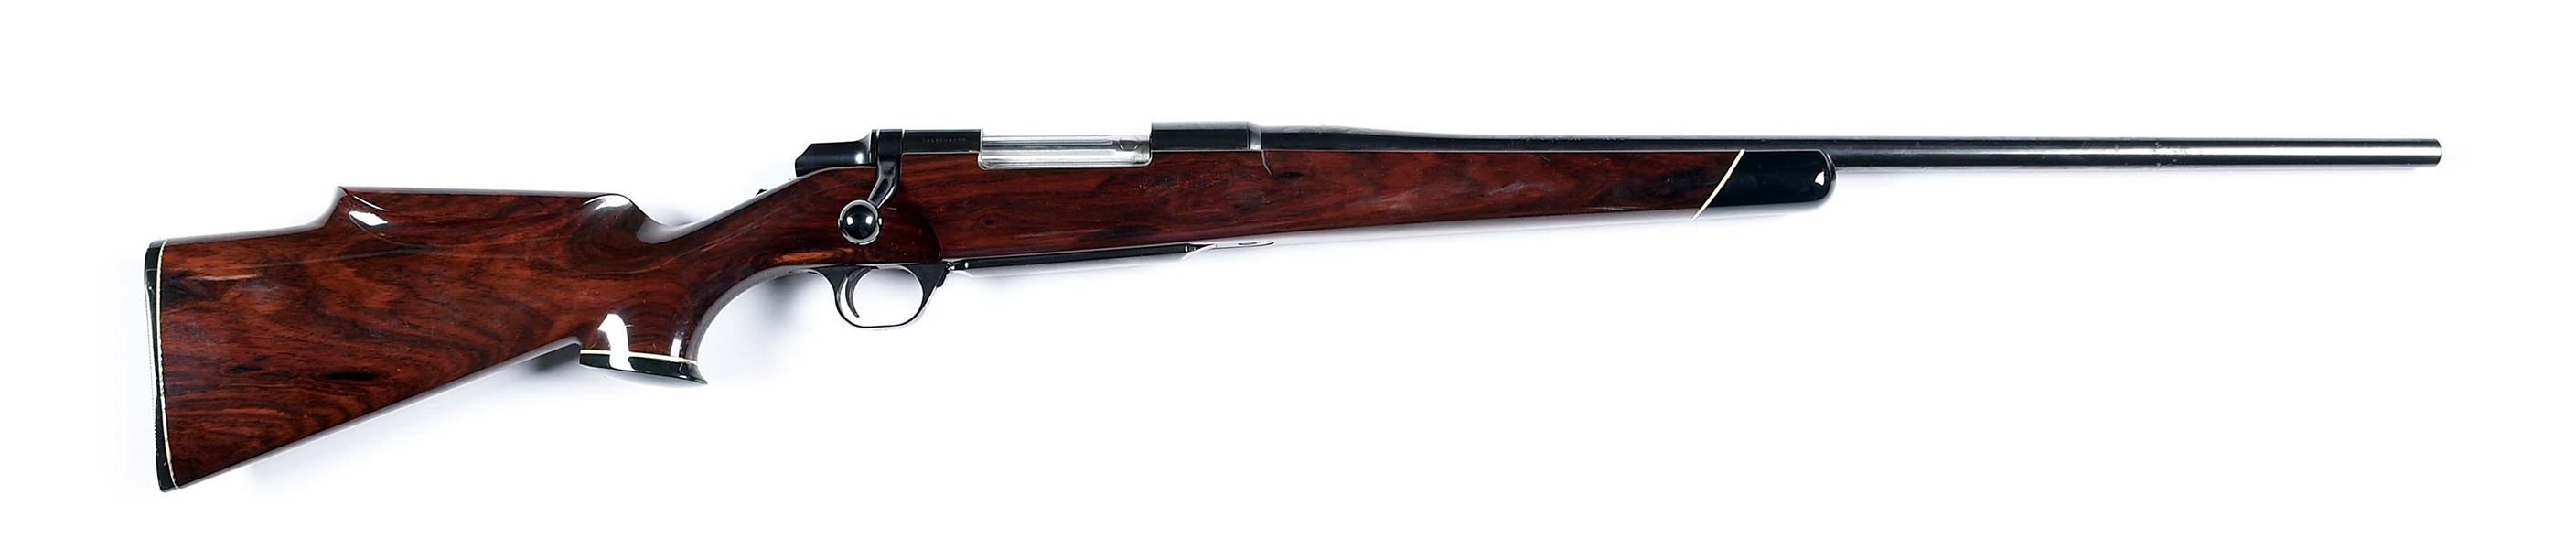 (M) BROWNING BBR BOLT ACTION RIFLE WITH LIGNUM VITAE/ GUAIACUM OFFICIANTE STOCK.